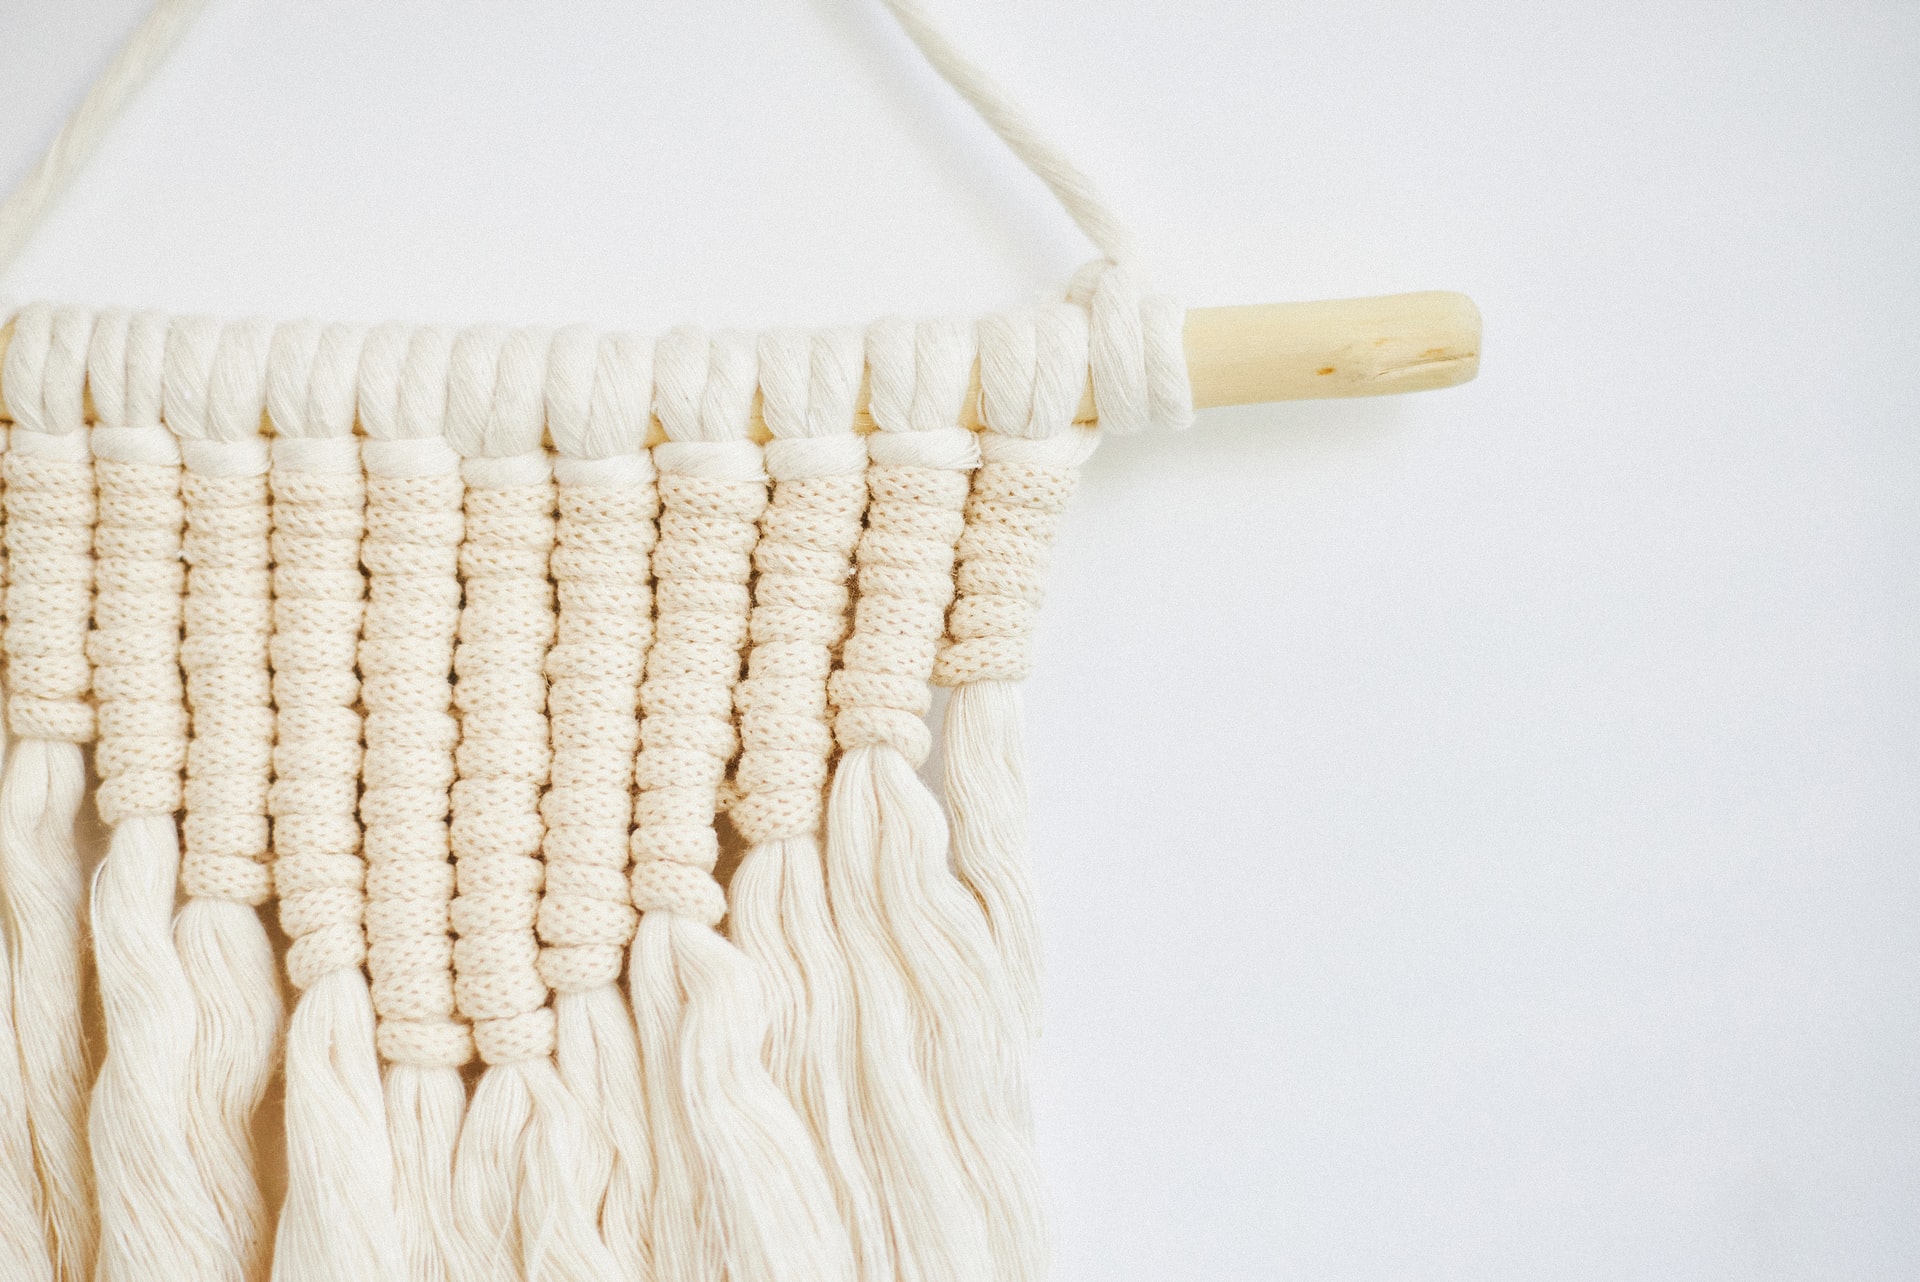 Macramé – decorations worth having in your home